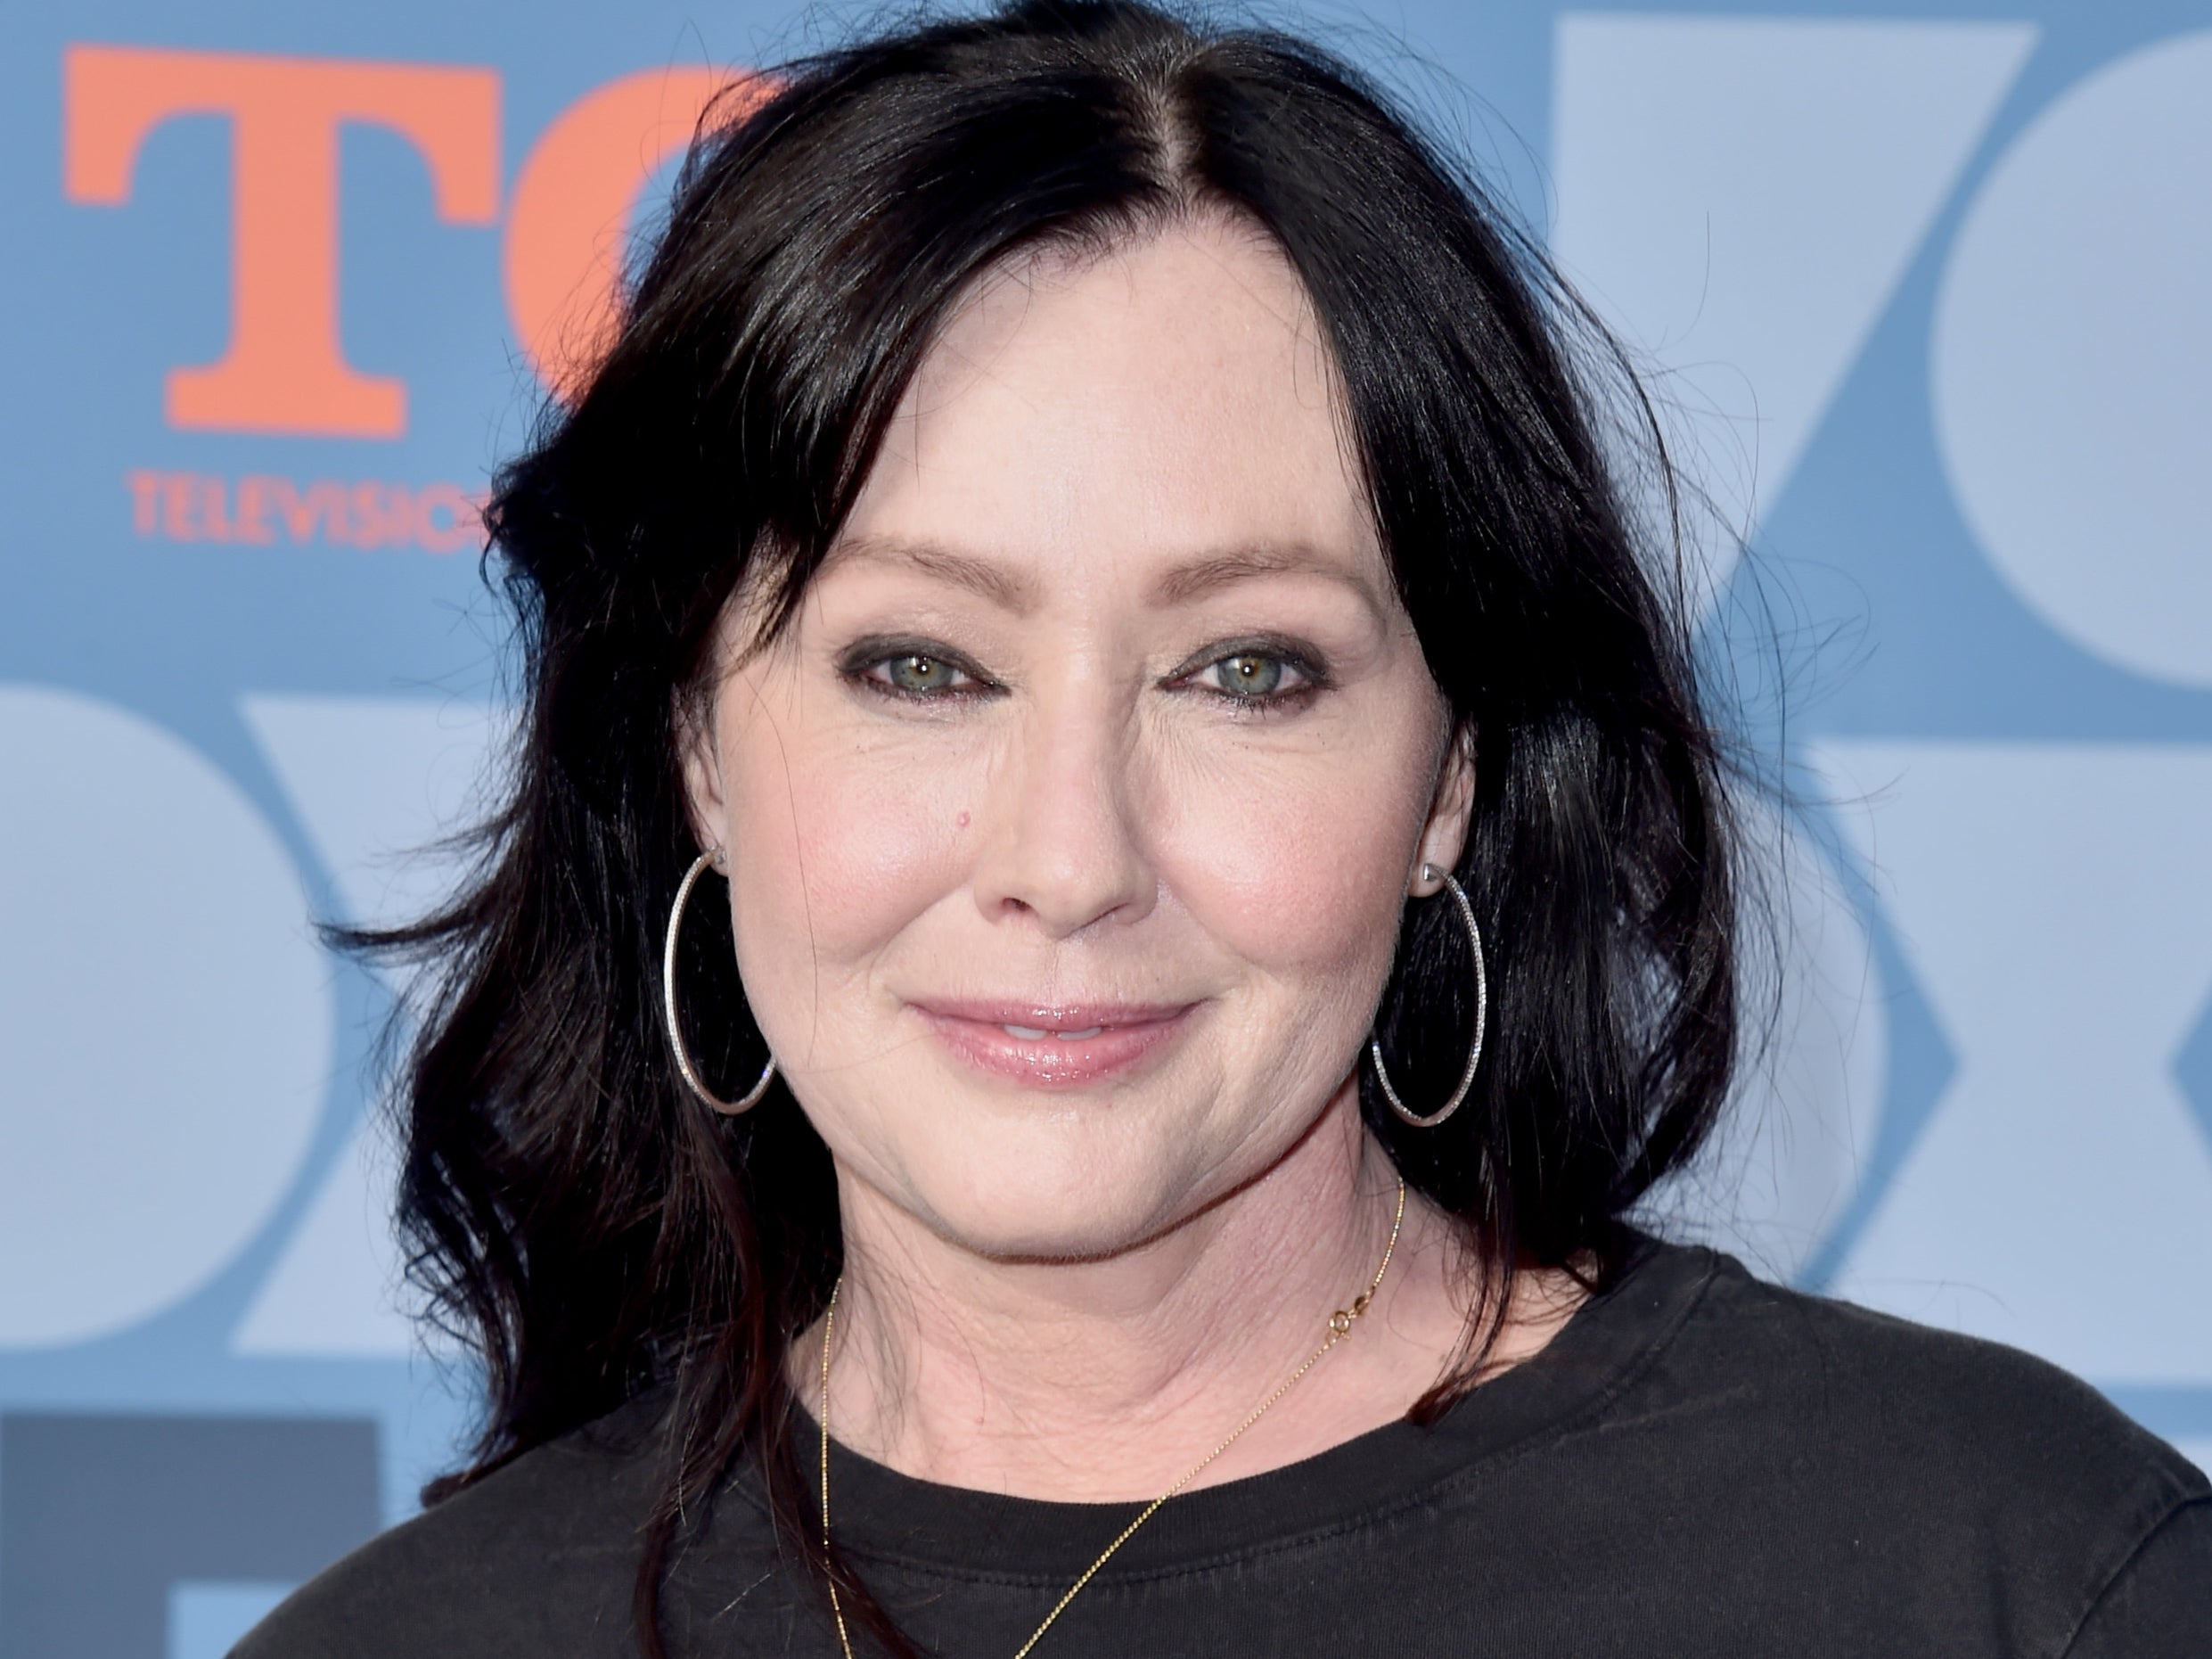 Shannen Doherty examined her own life on her podcast ‘Let’s Be Clear’